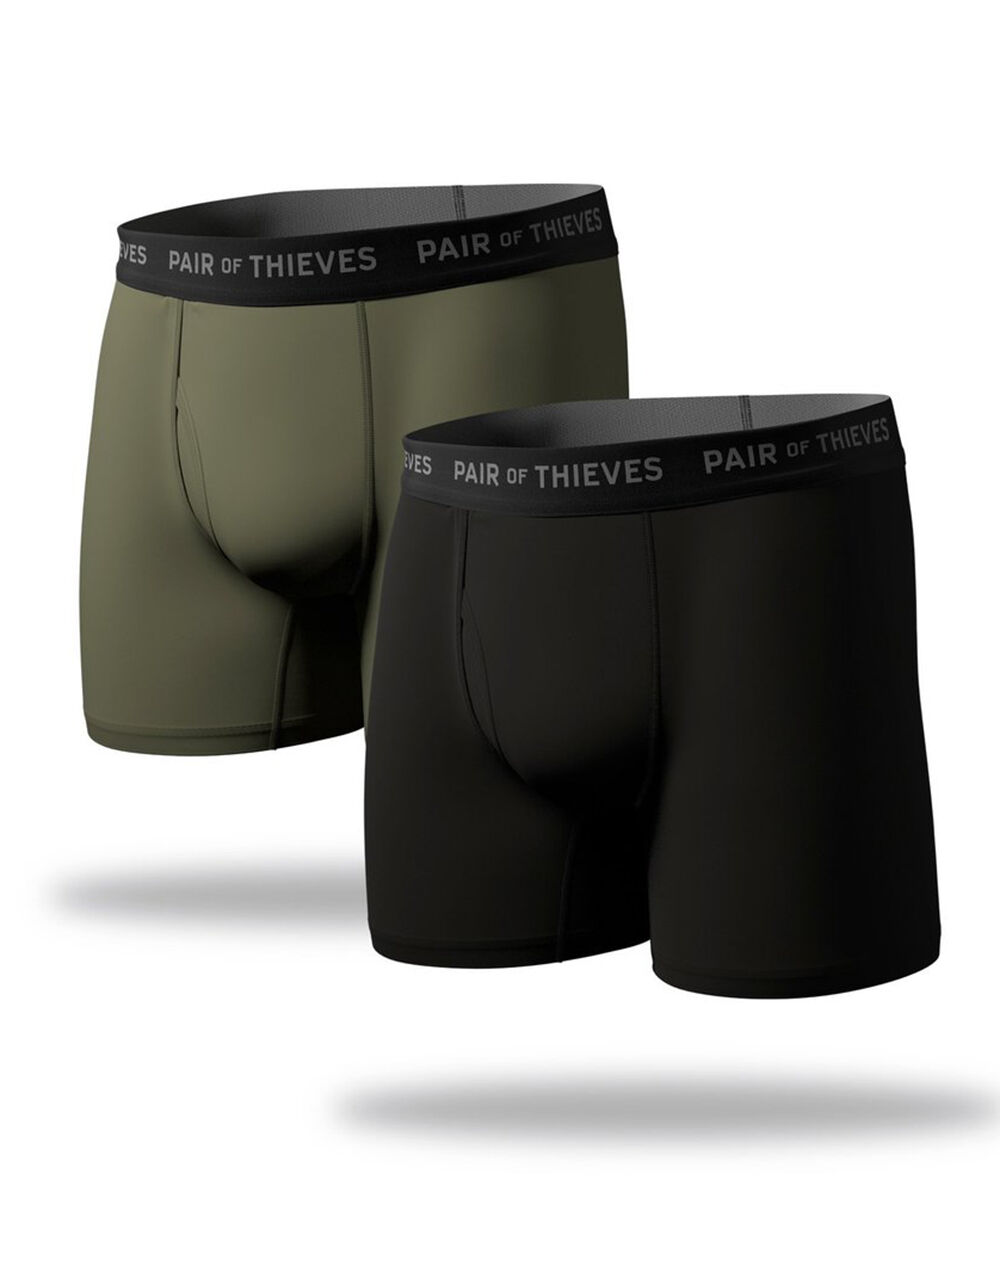 PAIR OF THIEVES 2 Pack SuperSoft Mens Boxer Briefs - MULTI